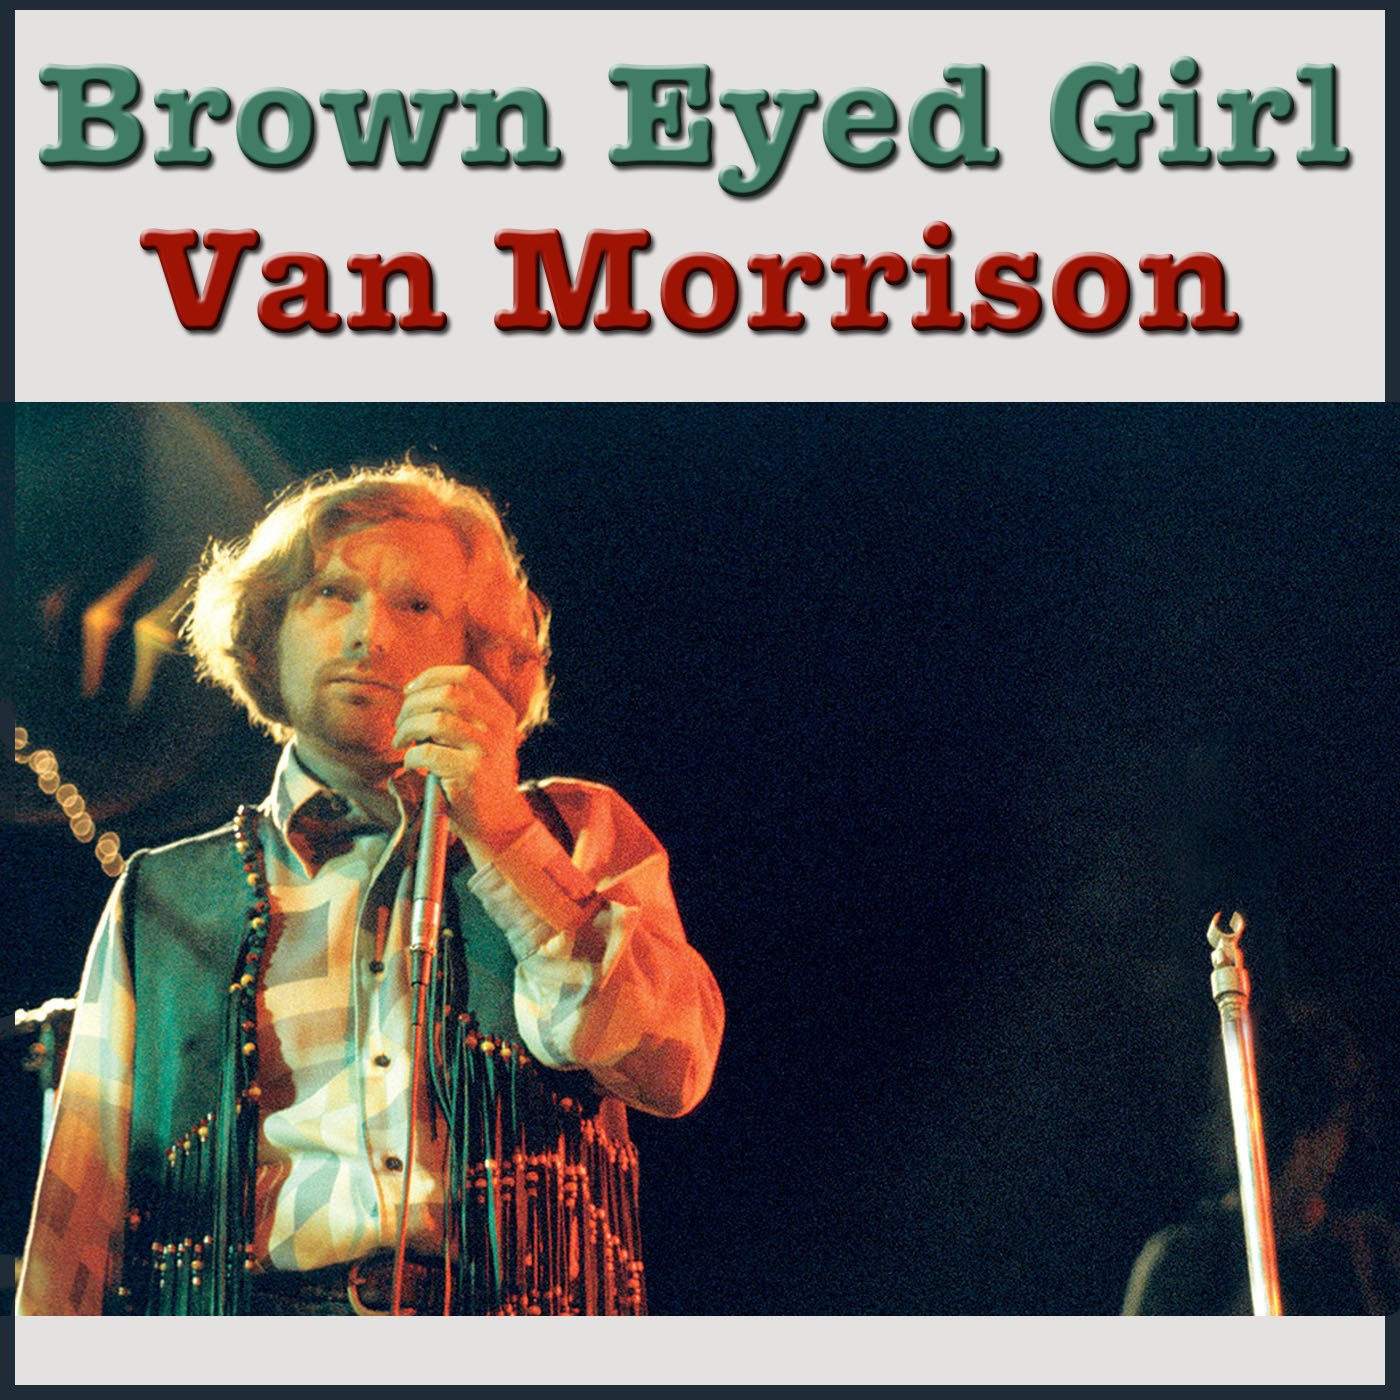 Brown Eyed Girl Van Morrison — Listen And Discover Music At Lastfm 7018